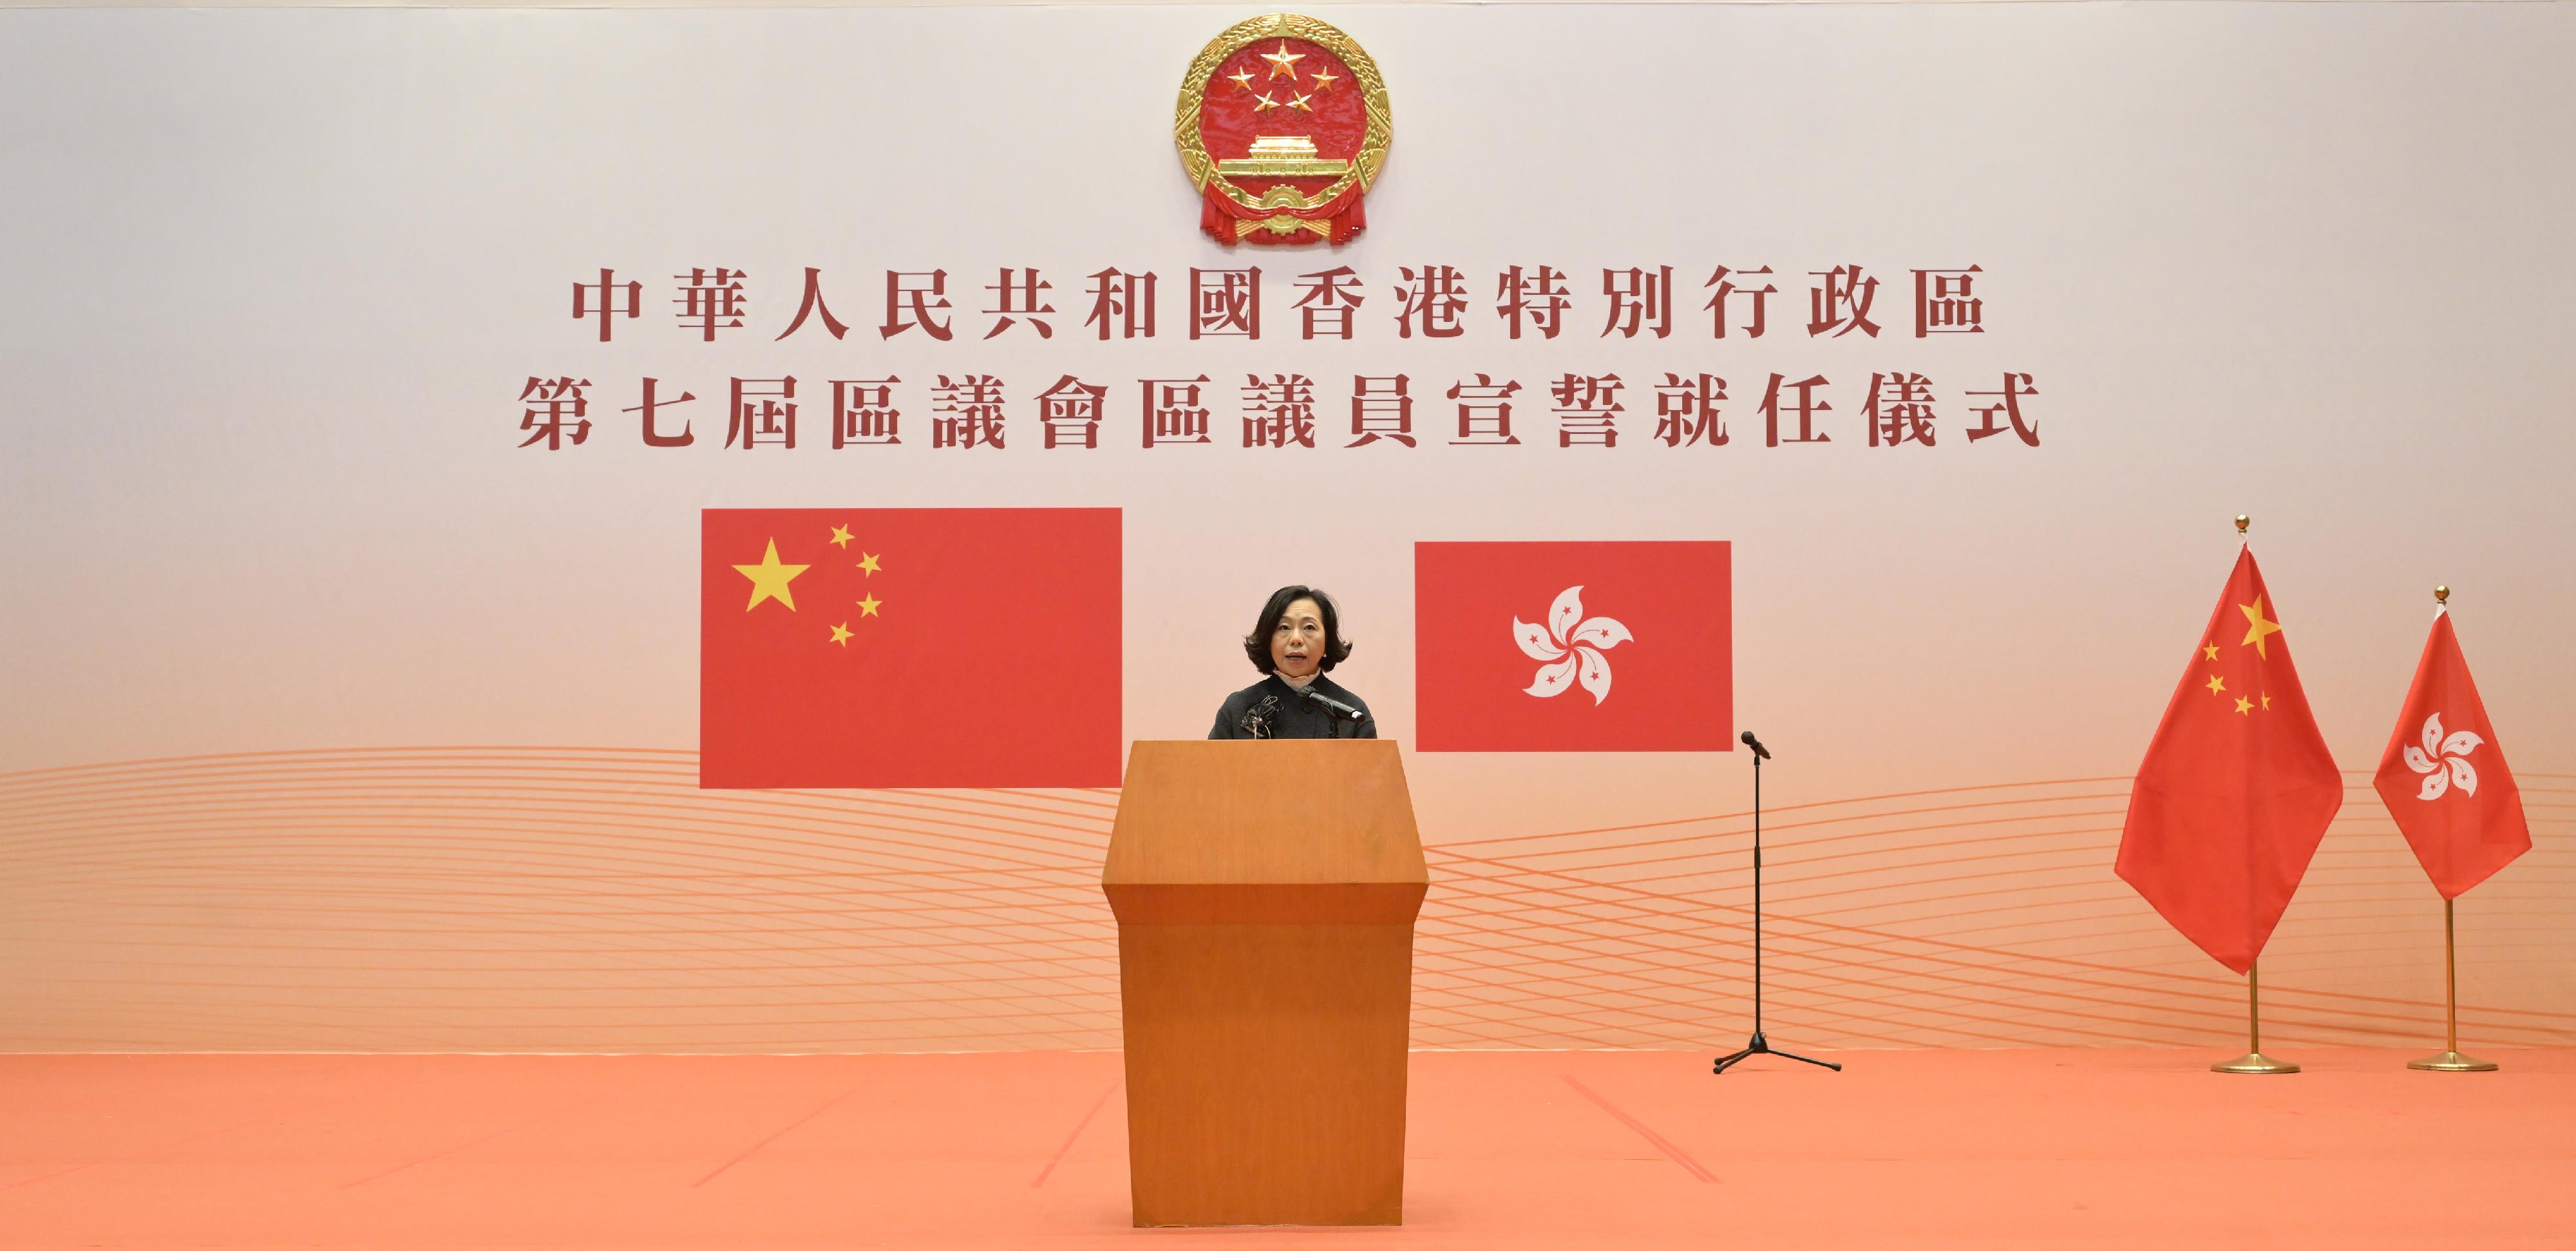 The Government held the oath-taking ceremony for members of the seventh term District Councils at the Conference Hall of the Central Government Offices today (January 1). The Secretary for Home and Youth Affairs, Miss Alice Mak, served as the oath administrator as authorised by the Chief Executive. Photo shows Miss Mak delivering remarks at the ceremony.
